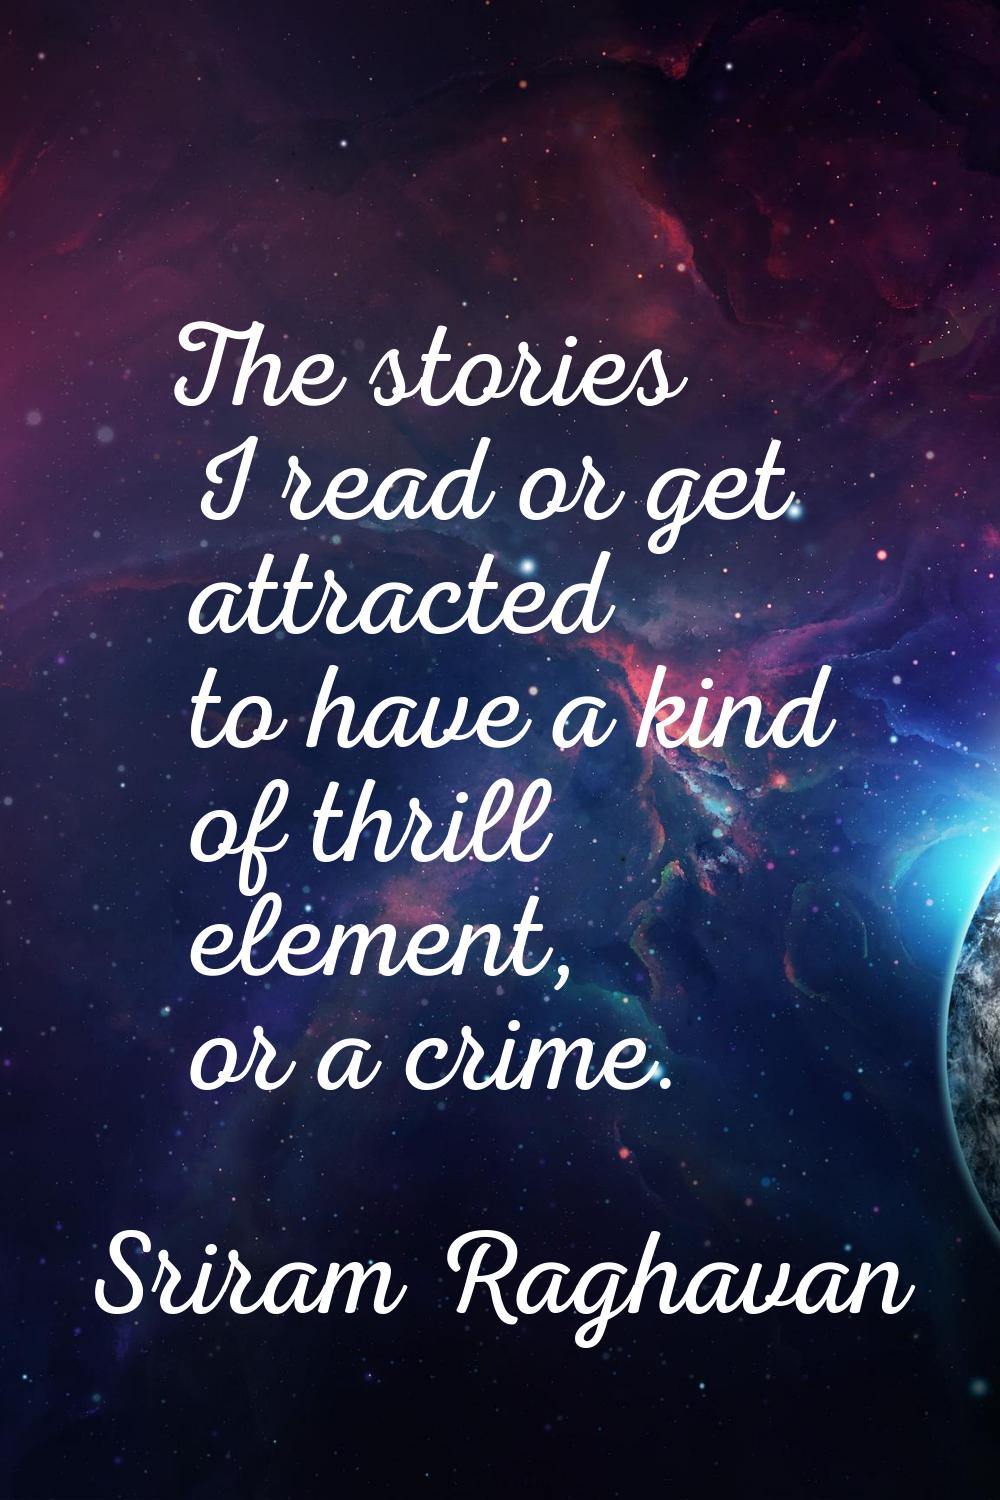 The stories I read or get attracted to have a kind of thrill element, or a crime.